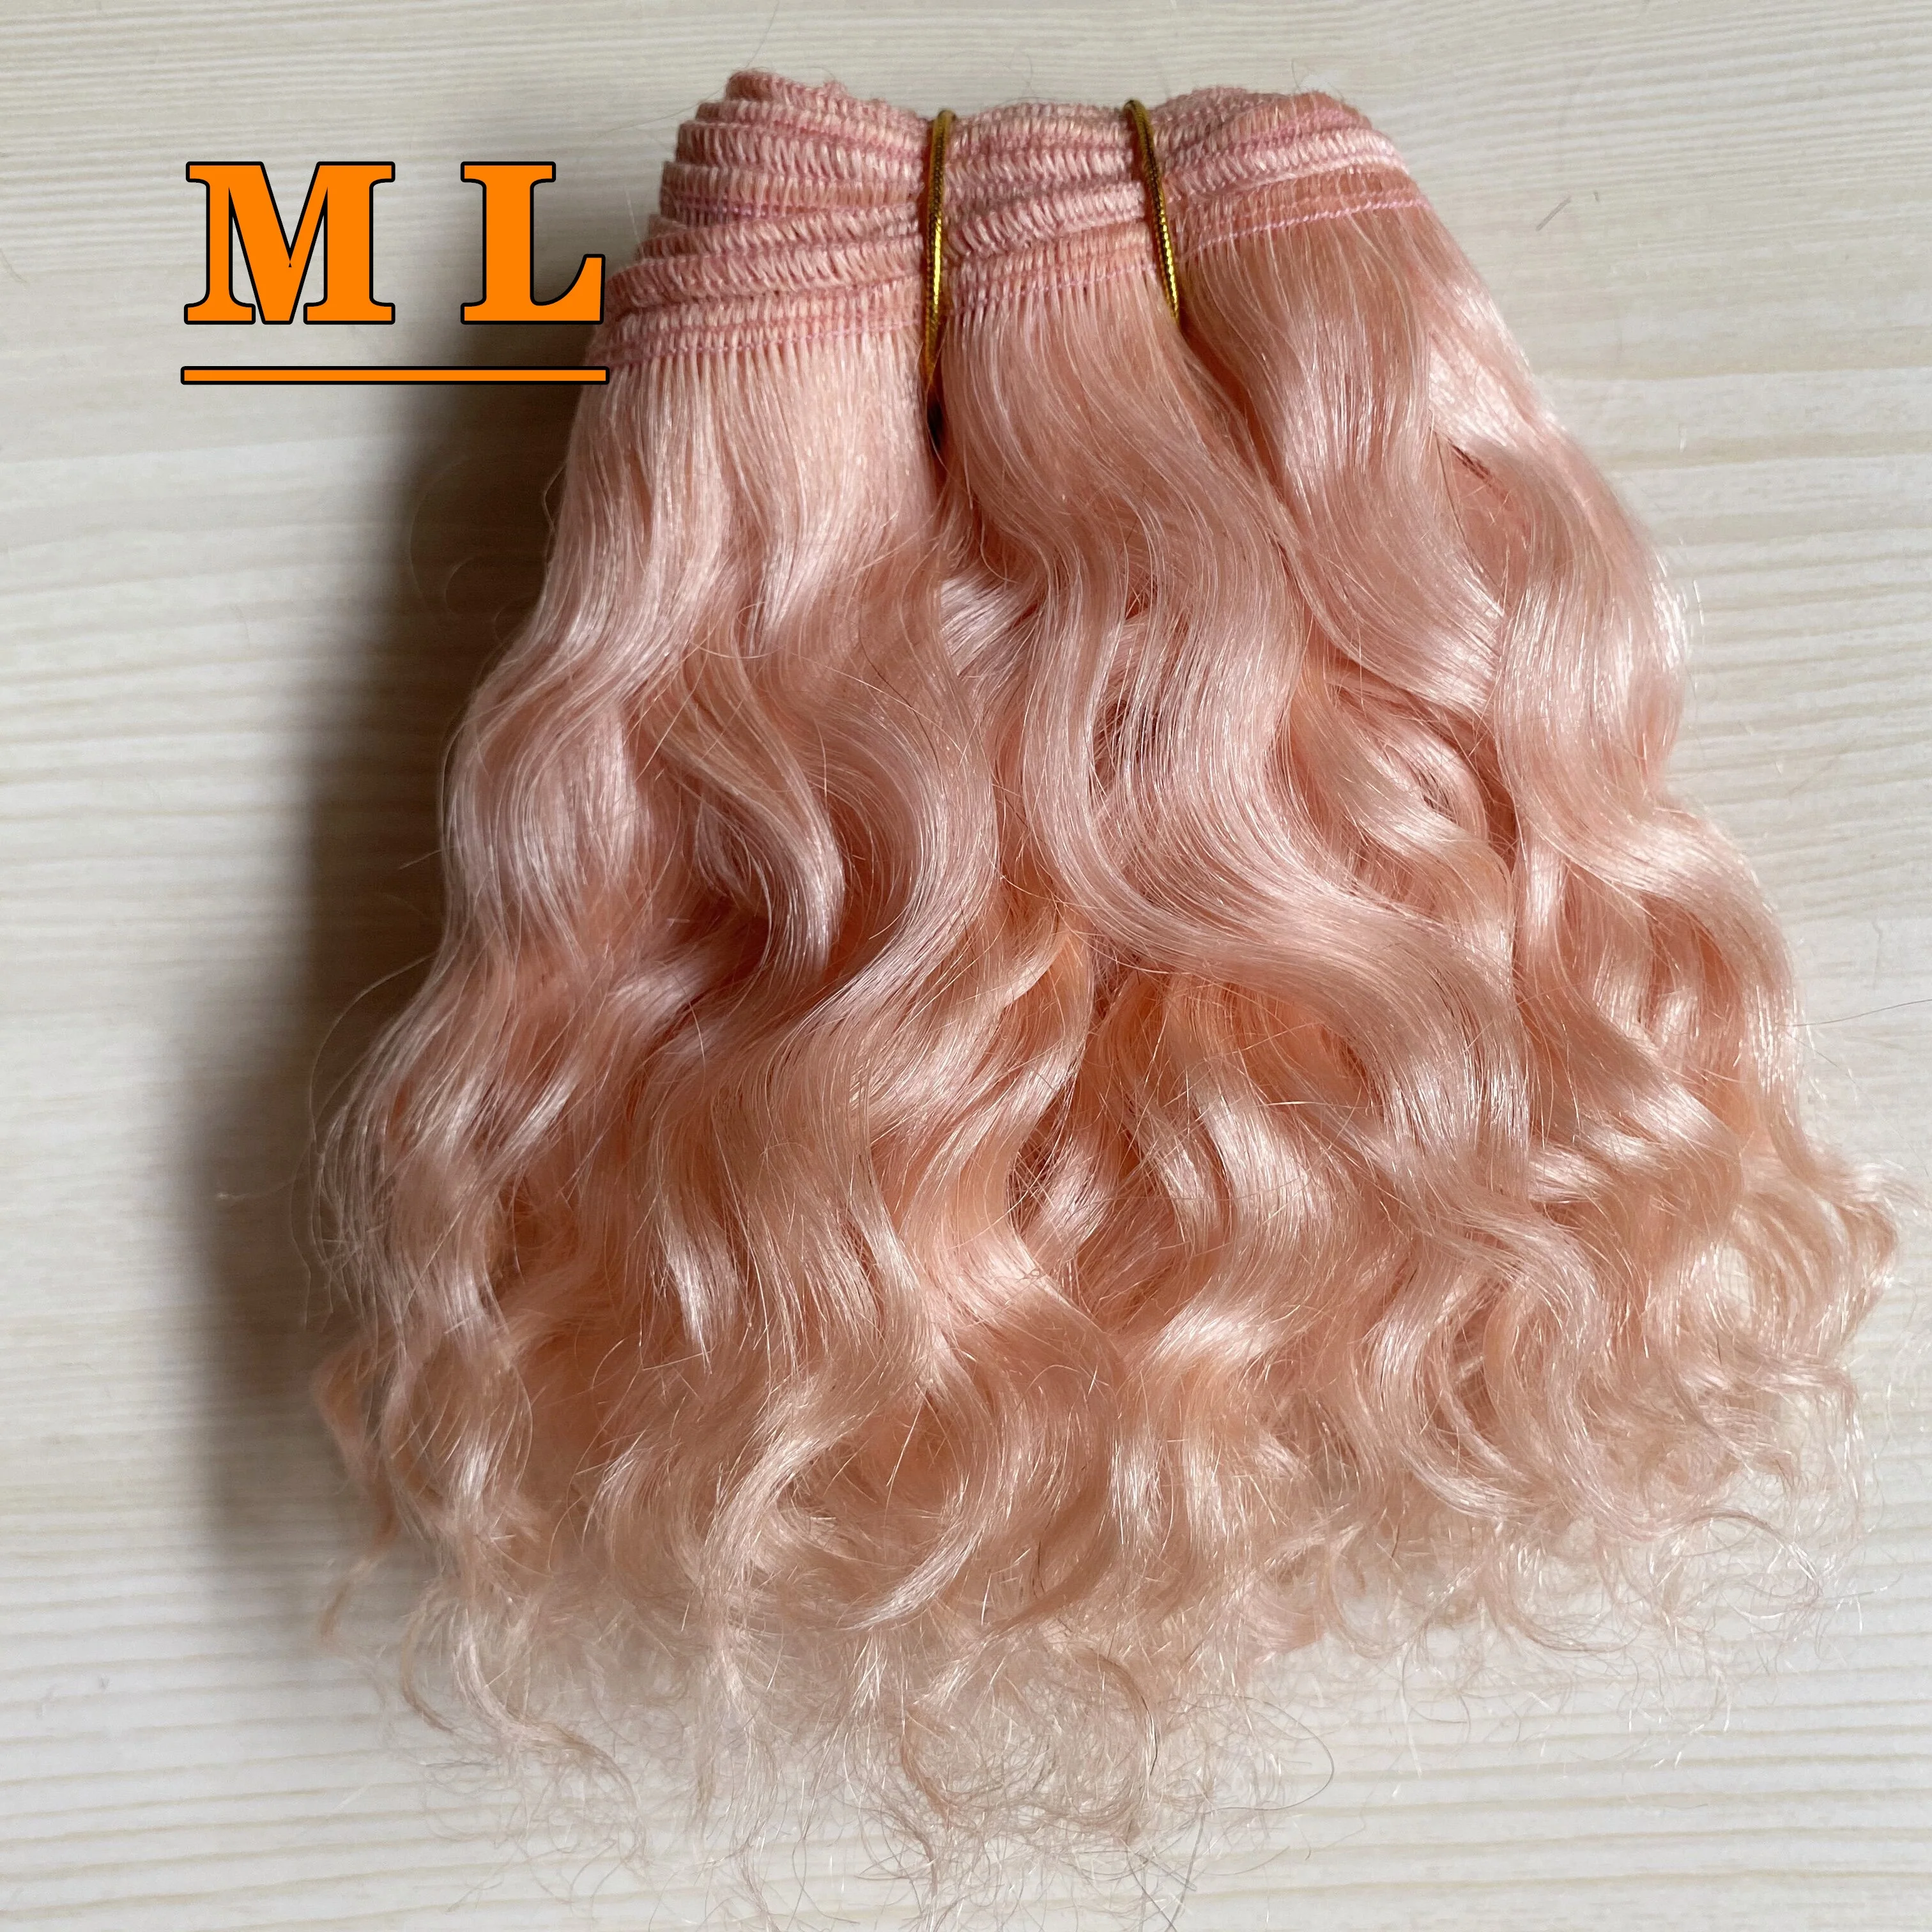 

DIY Doll Hair Extensions Goat Yak tail hair pink color curly type